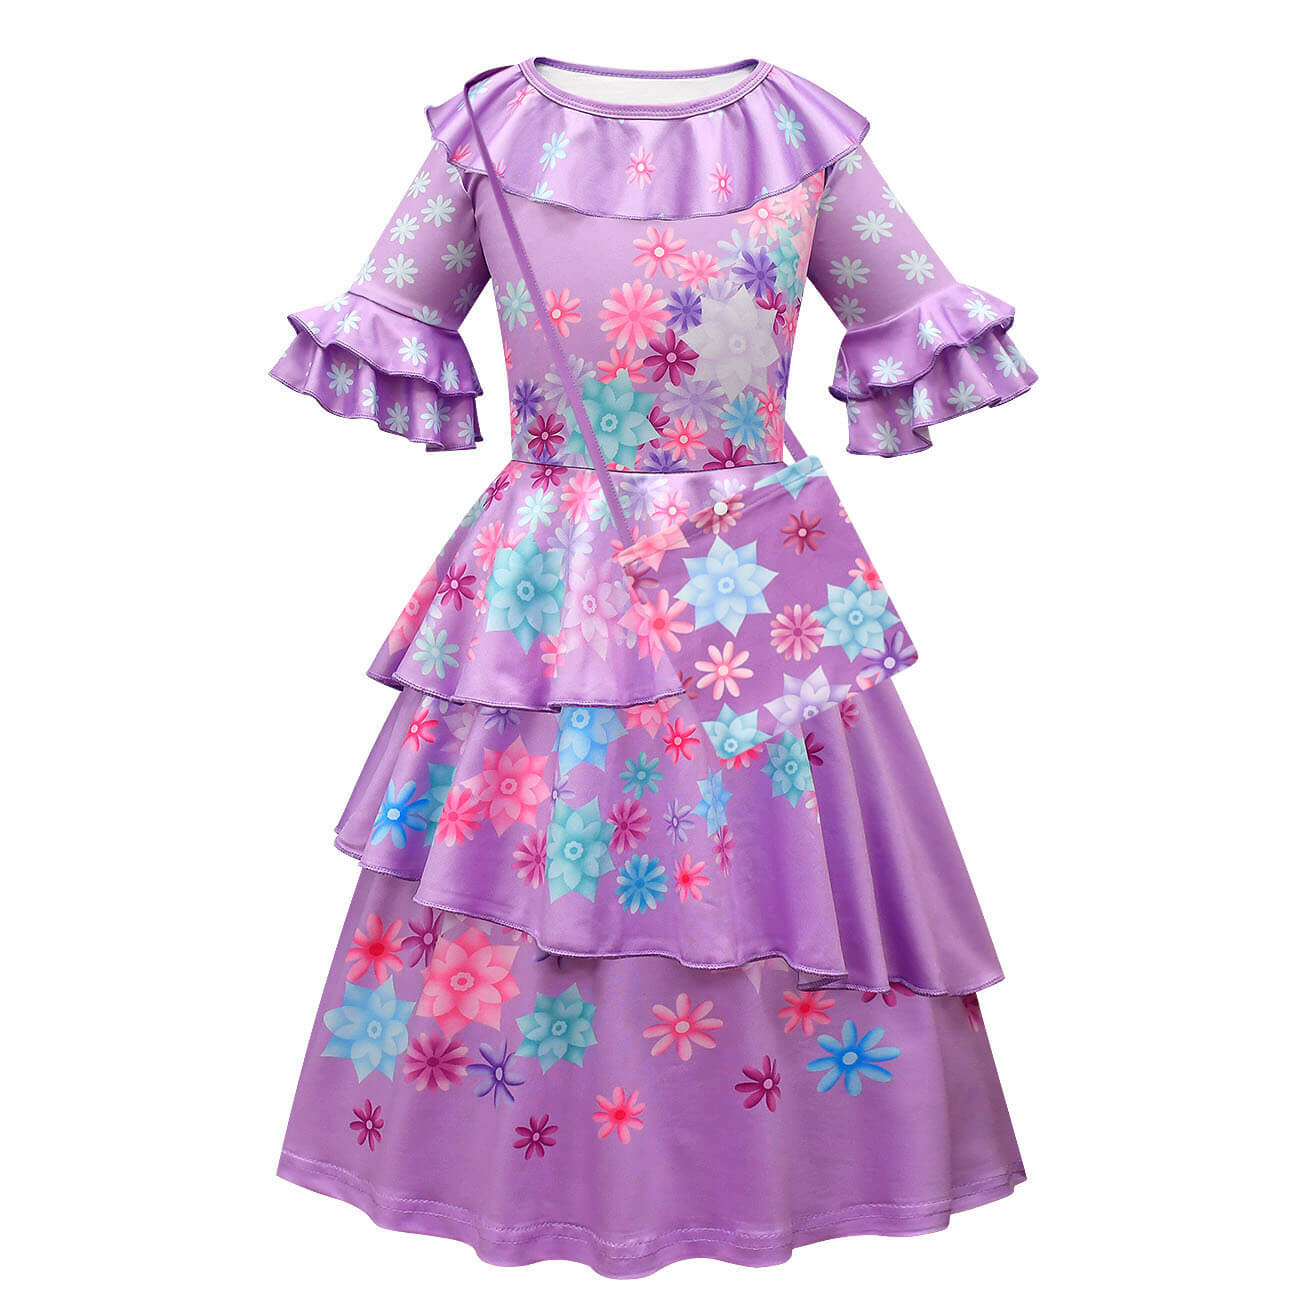 Girls Isabela Dress Perfect Flower Princess Isabela Cosplay Outfit